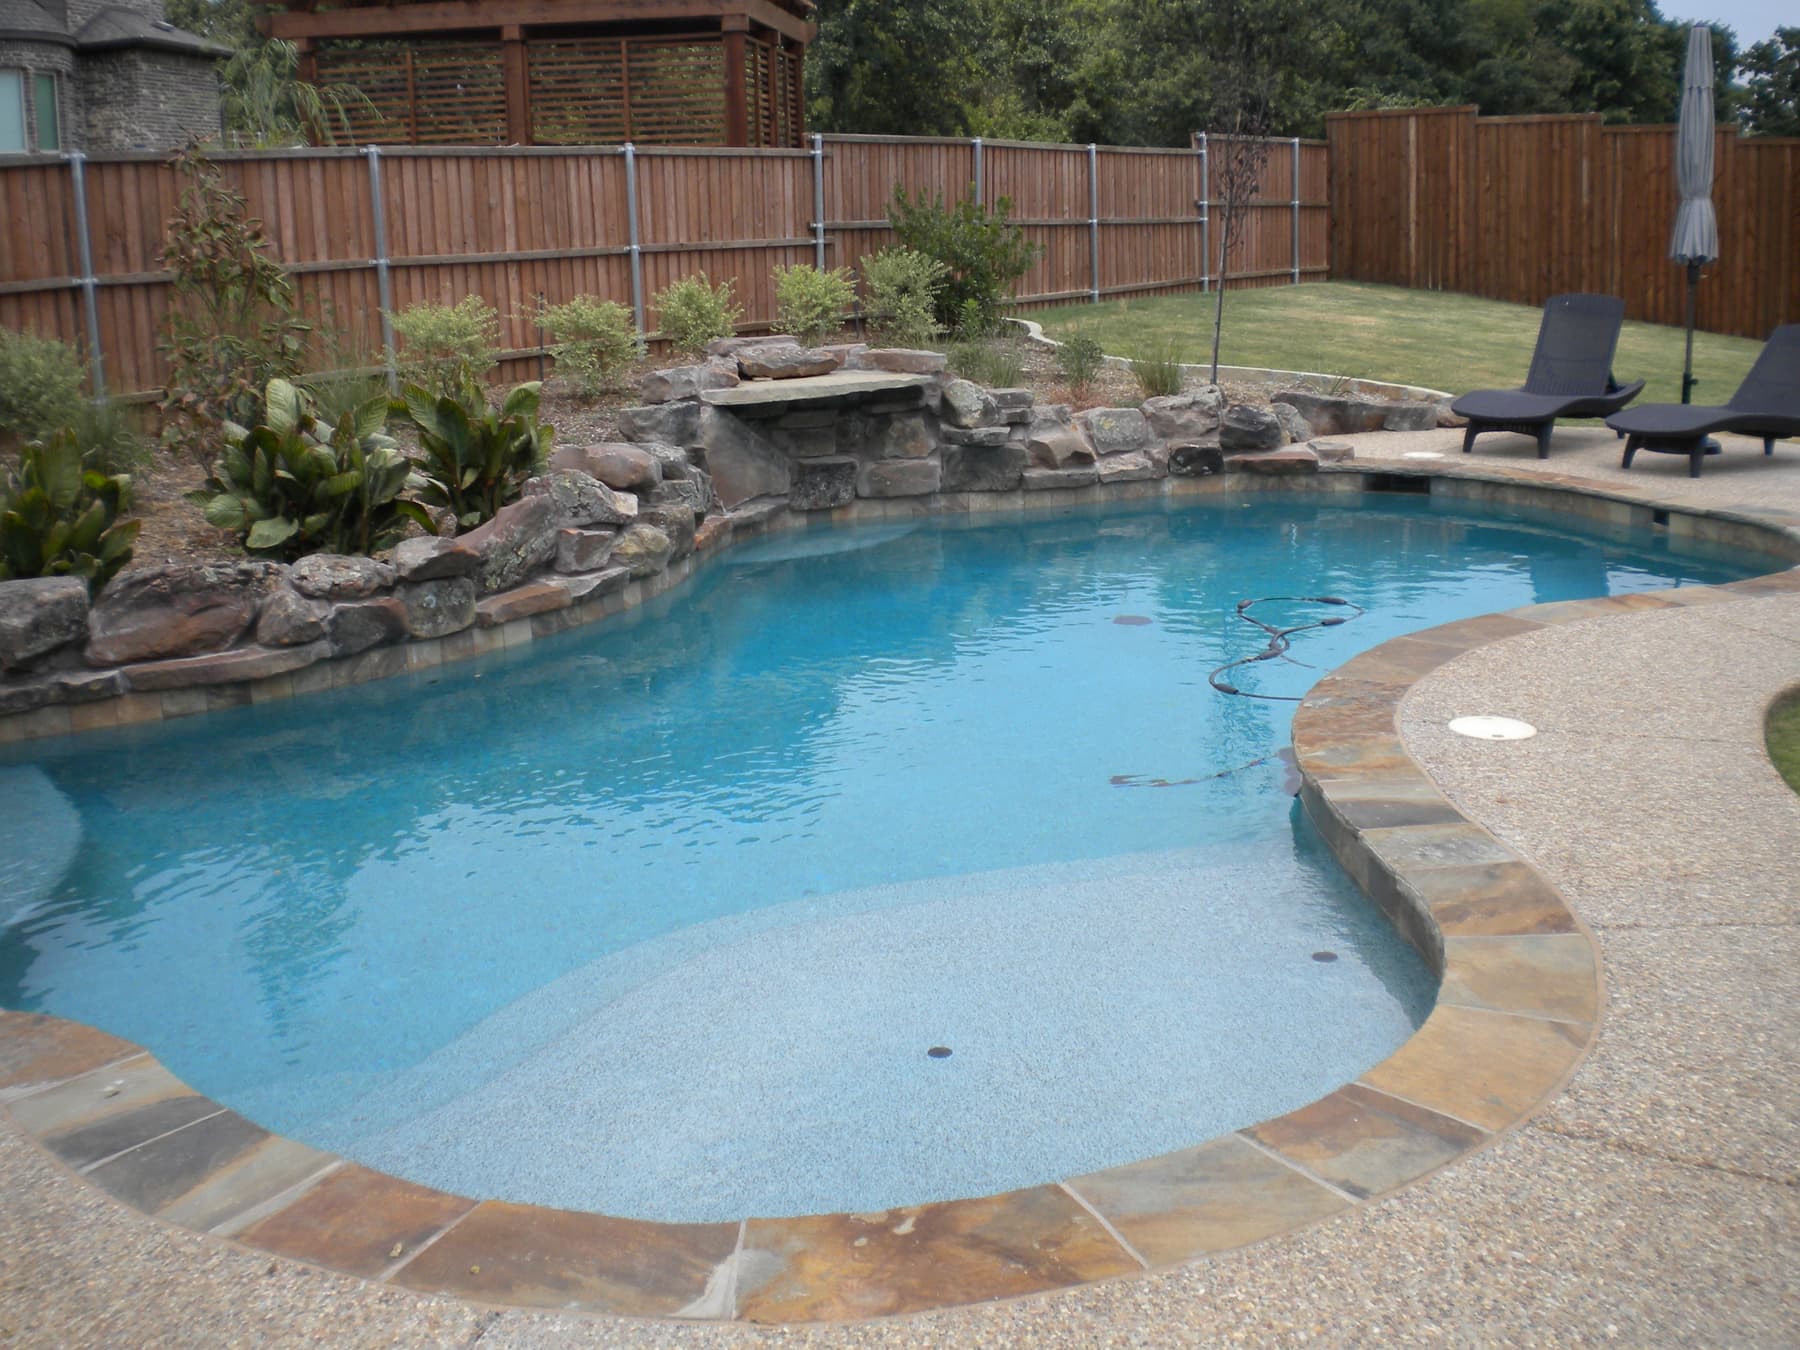 The natural boulder waterfall serves as a backdrop to this Denton County area pool. Exposed aggregate decking and a random colored Oklahoma flagstone envelop the Tahoe blue waters created by the interior finish.